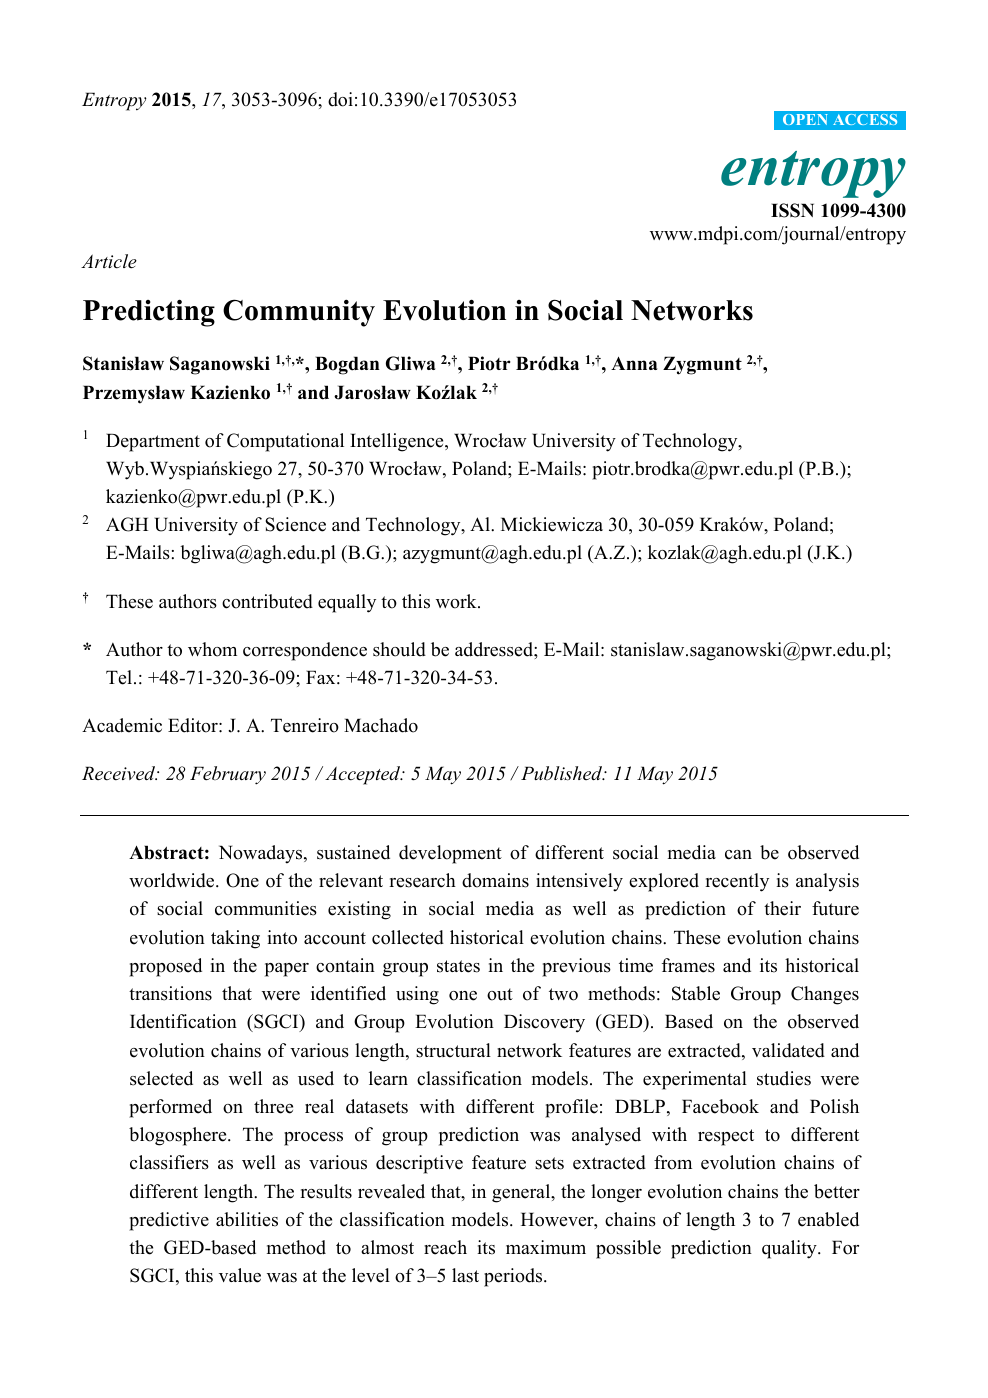 Predicting Community Evolution In Social Networks Topic Of Research Paper In Computer And Information Sciences Download Scholarly Article Pdf And Read For Free On Cyberleninka Open Science Hub